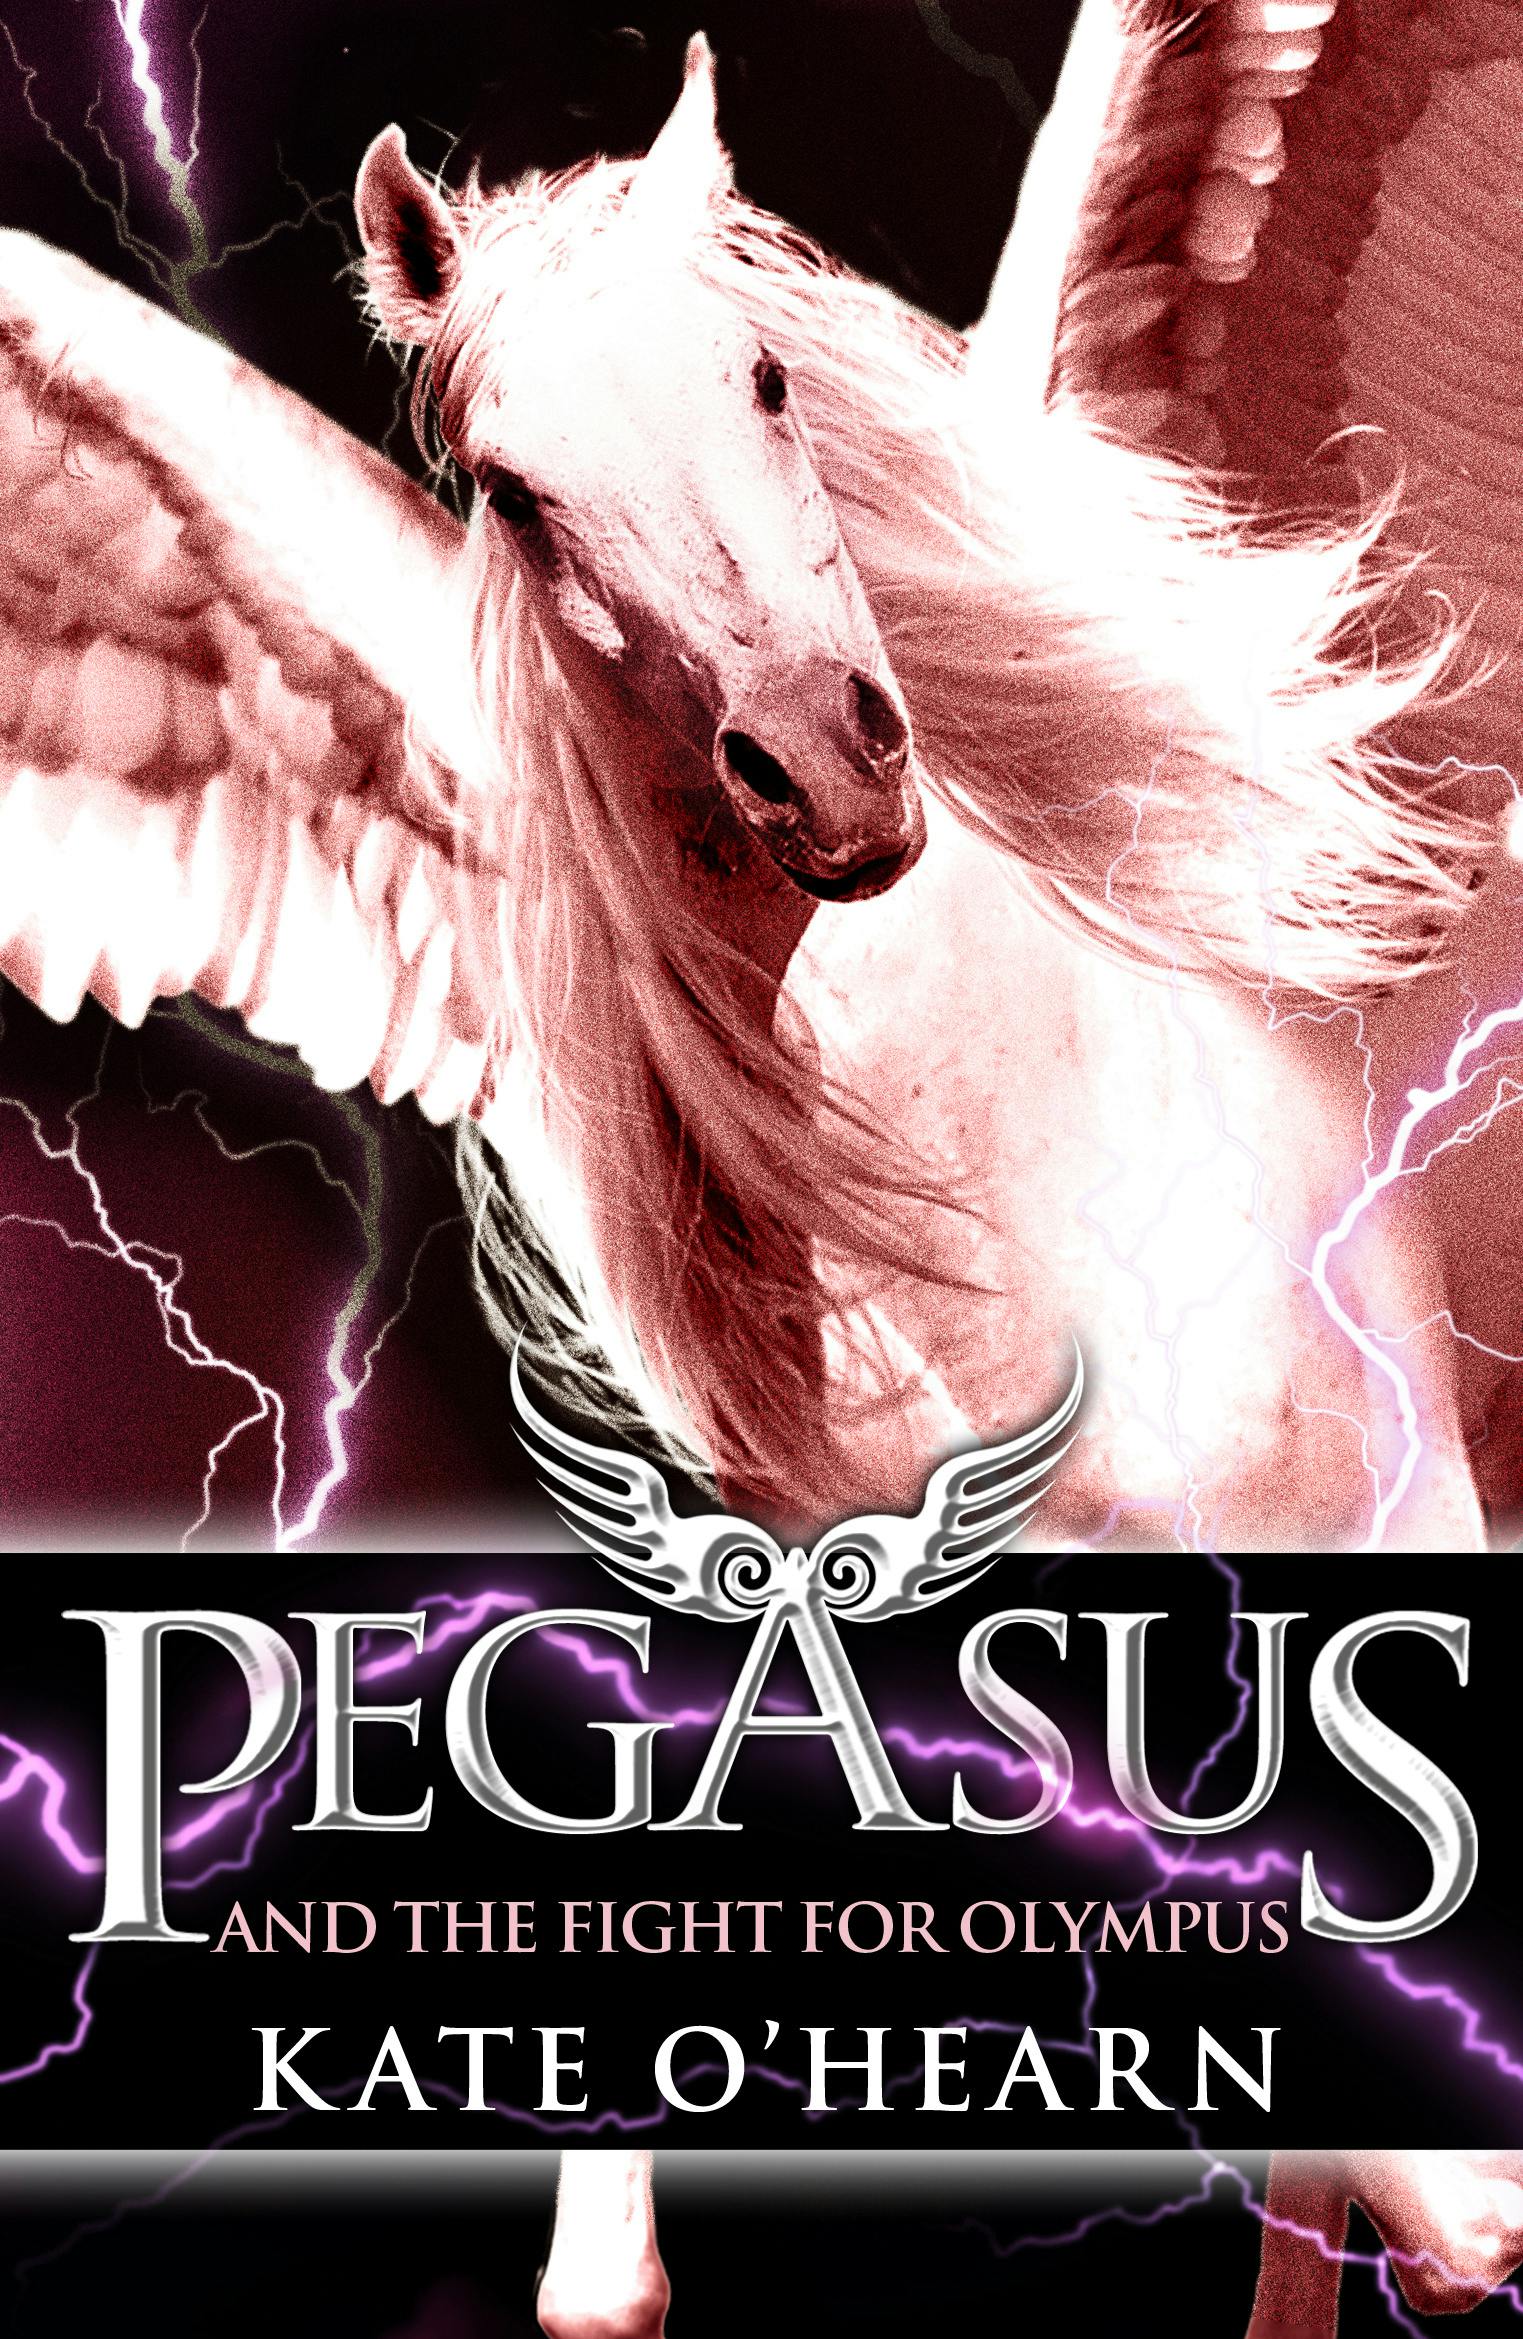 Pegasus and the Fight for Olympus Book 2 by Kate O'Hearn Books Hachette Australia